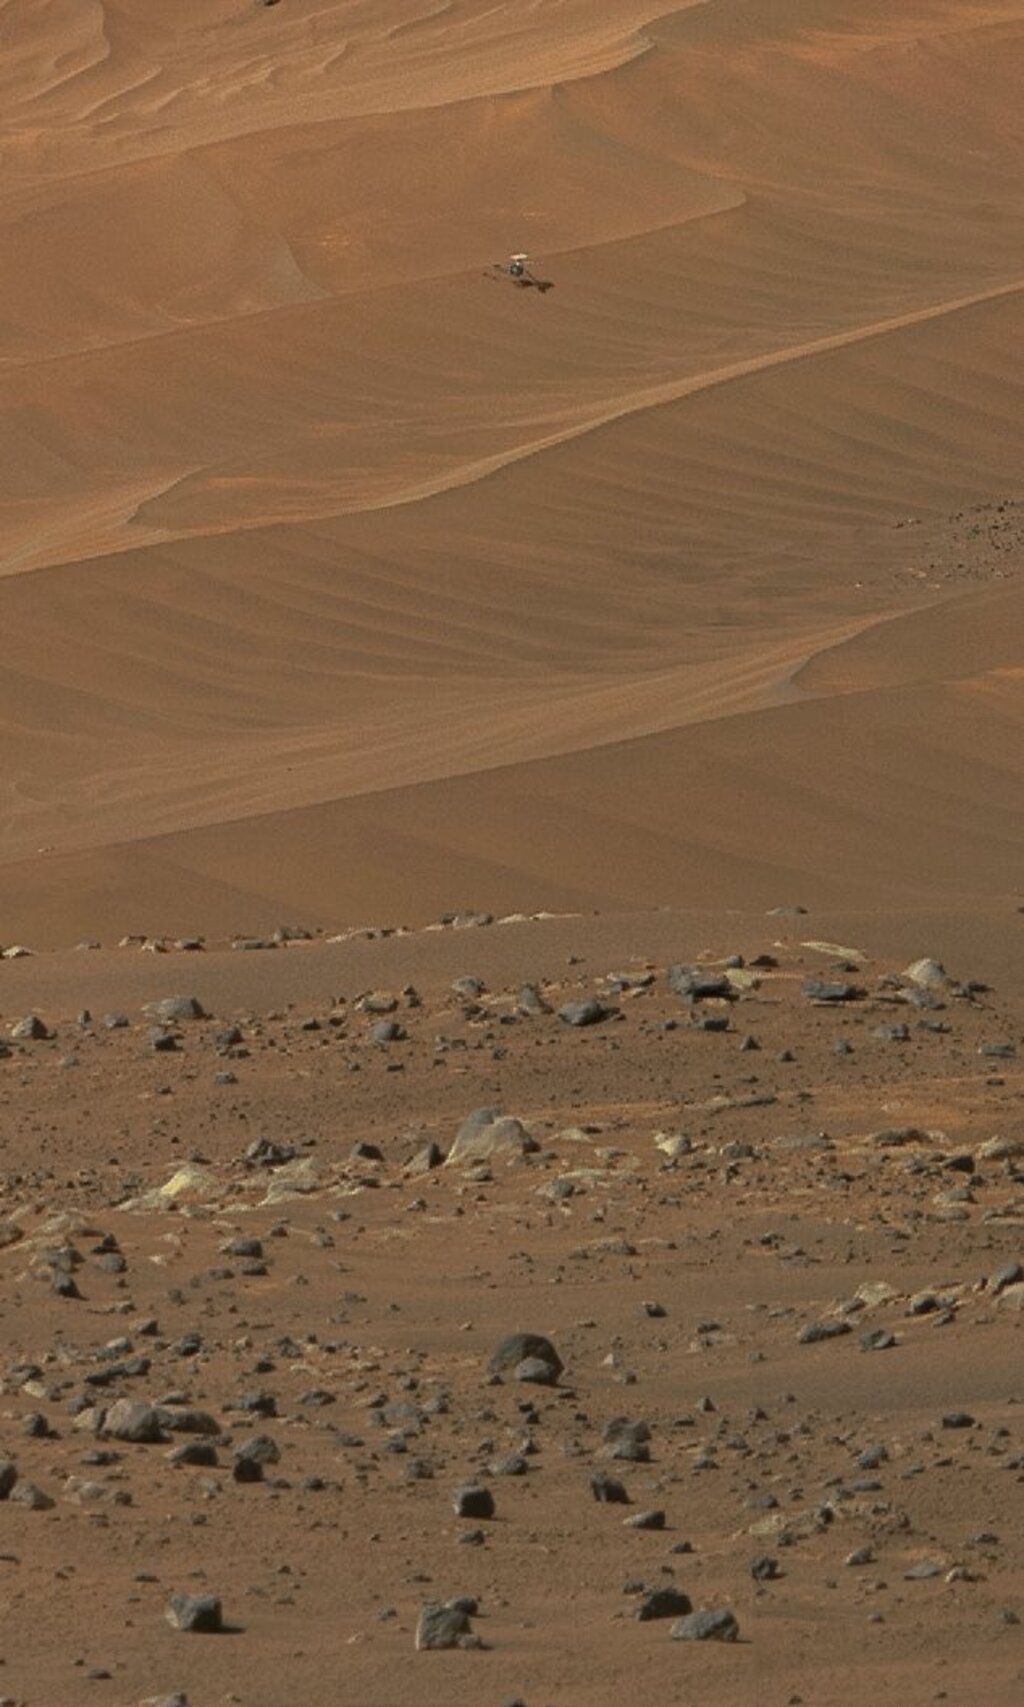 rocky surface of Mars with Ingenuity off in the distance